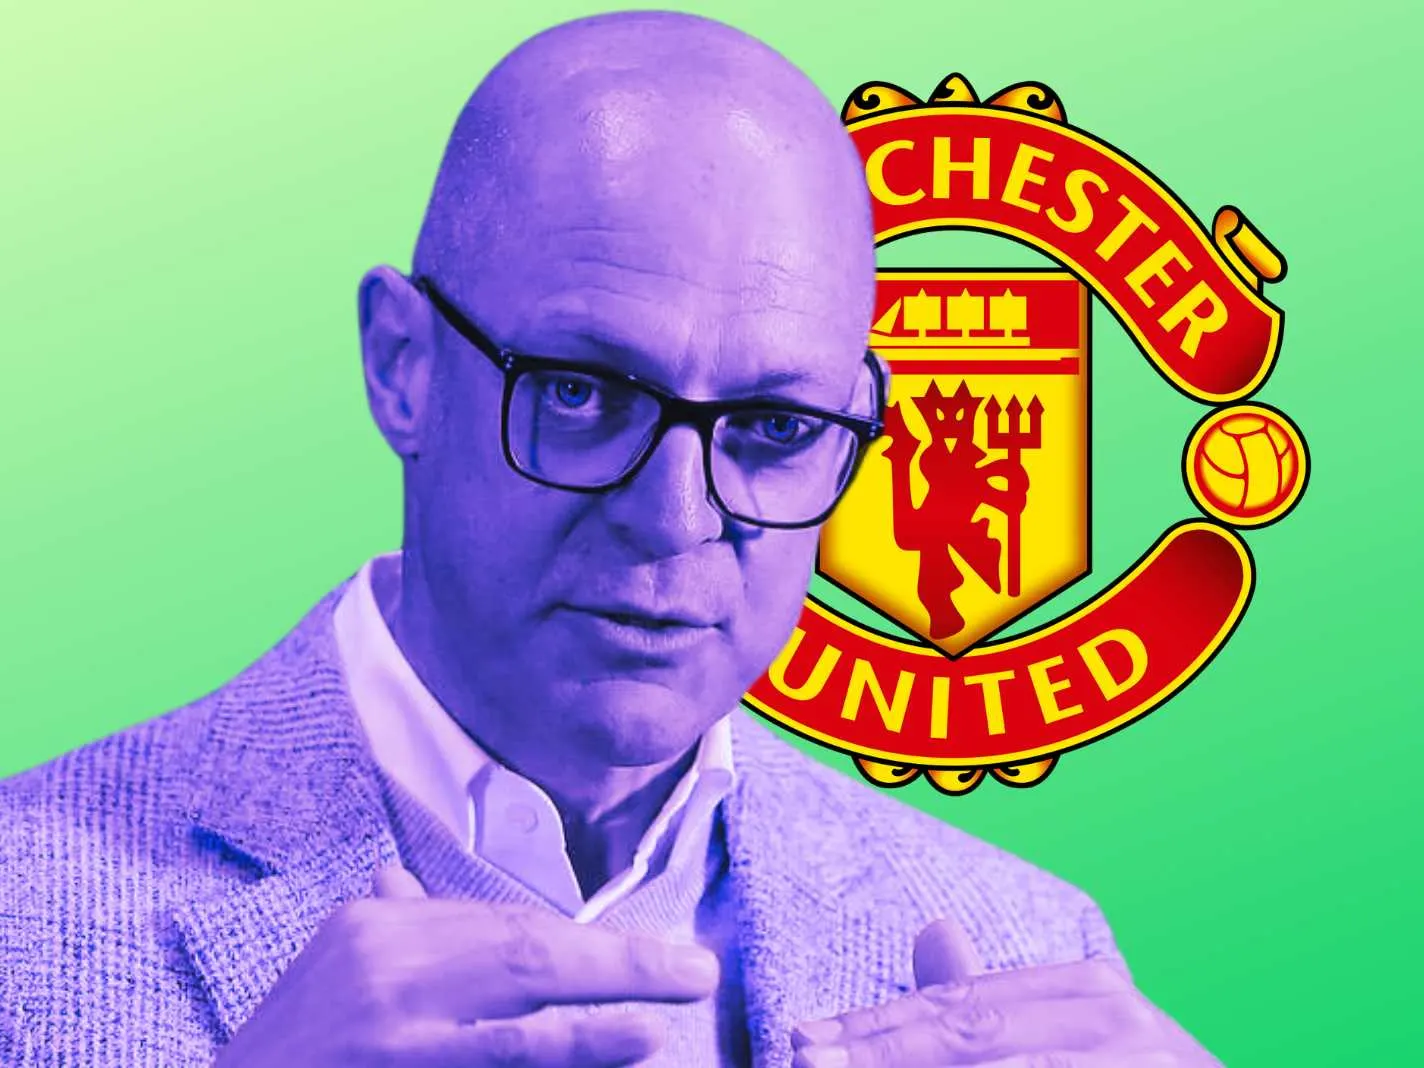 Sir Dave Brailsford and Man United logo in the background